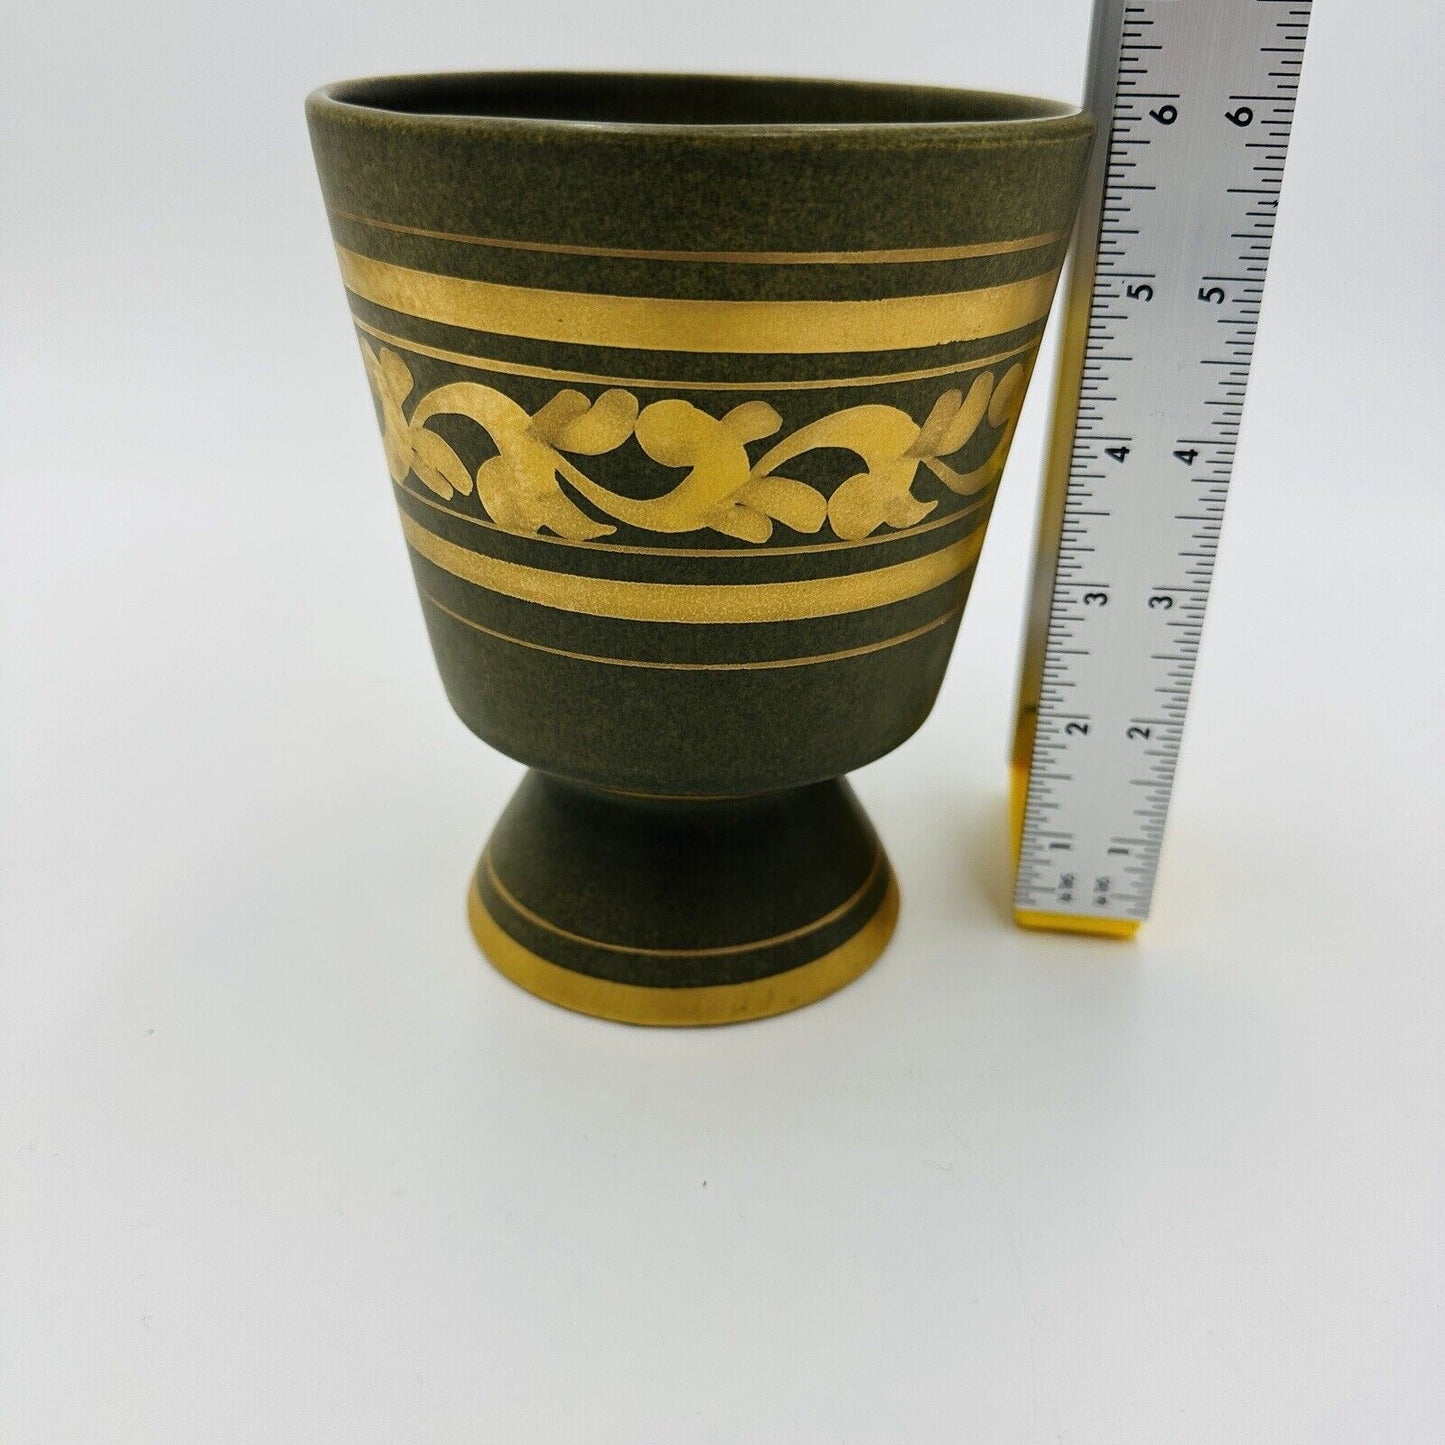 Mcm Vee Jackson California Pottery Footed Vase Planter Green Gold Trim